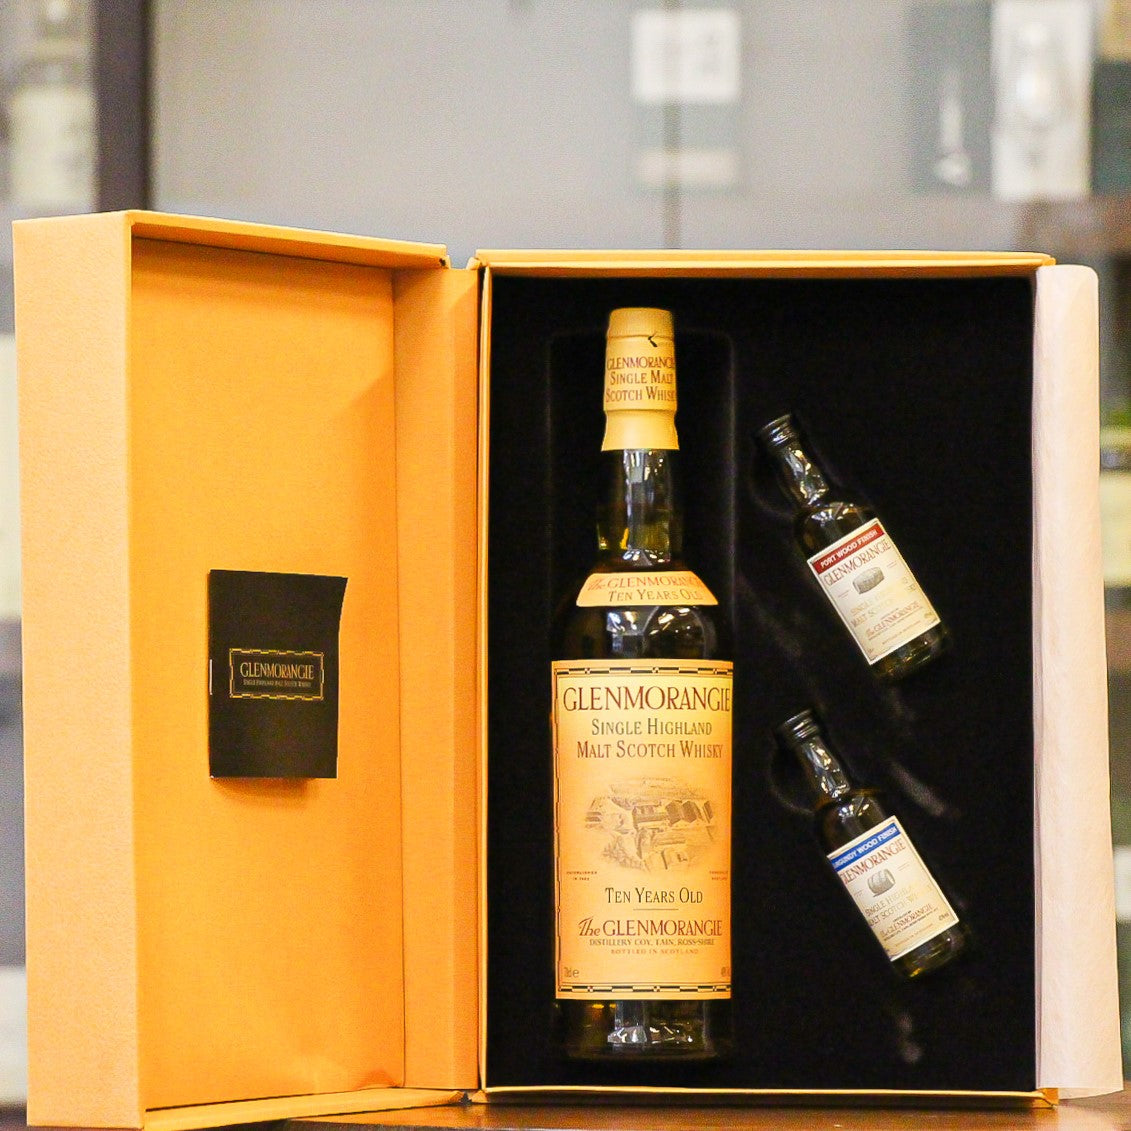 An older bottling of the 10 Year old Single Malt Whisky from the 1990s (our estimate) from this Highland distillery of GLenmorangie in a gift set, which also includes a 5cl of Burgundy Wood Finish and a 5cl of Port Wood Finish.